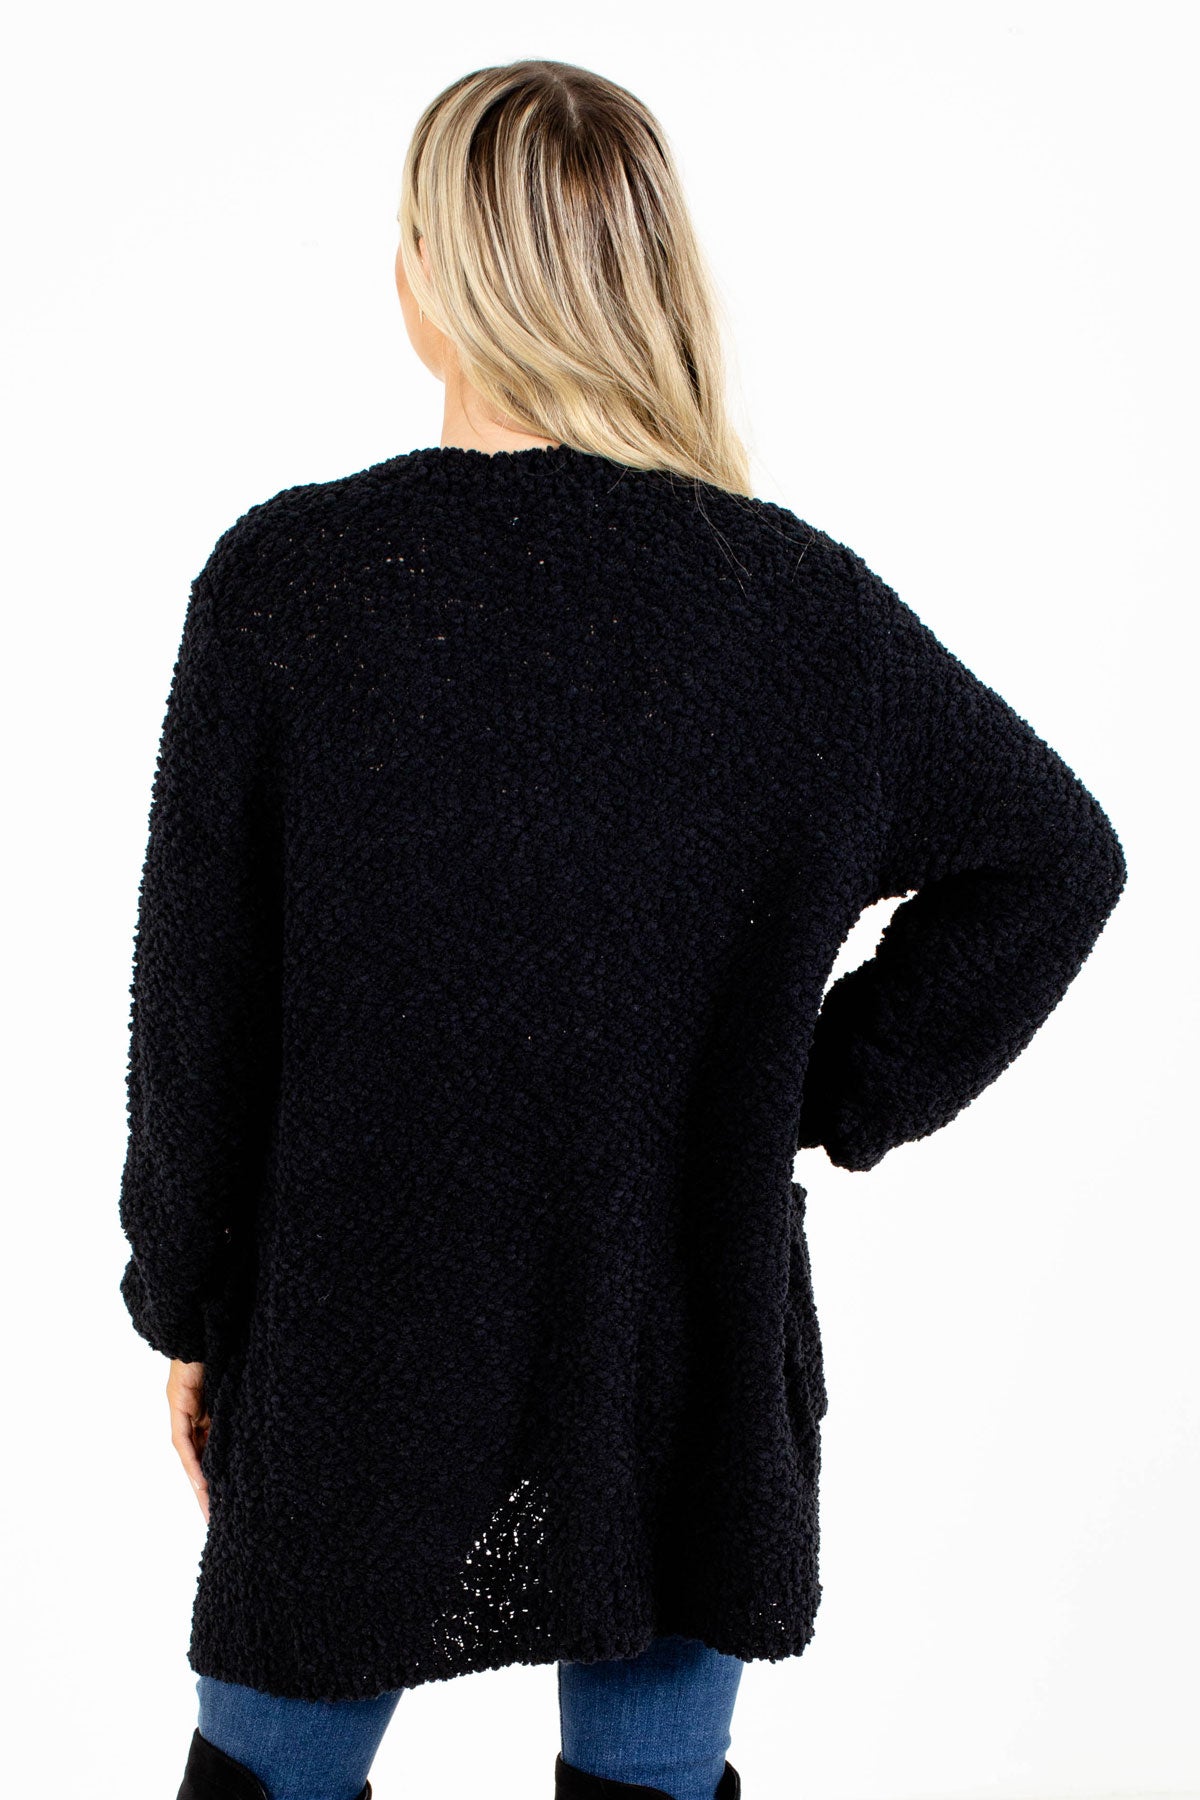 Black Stretchy Sweater Cardigan Boutique Styles